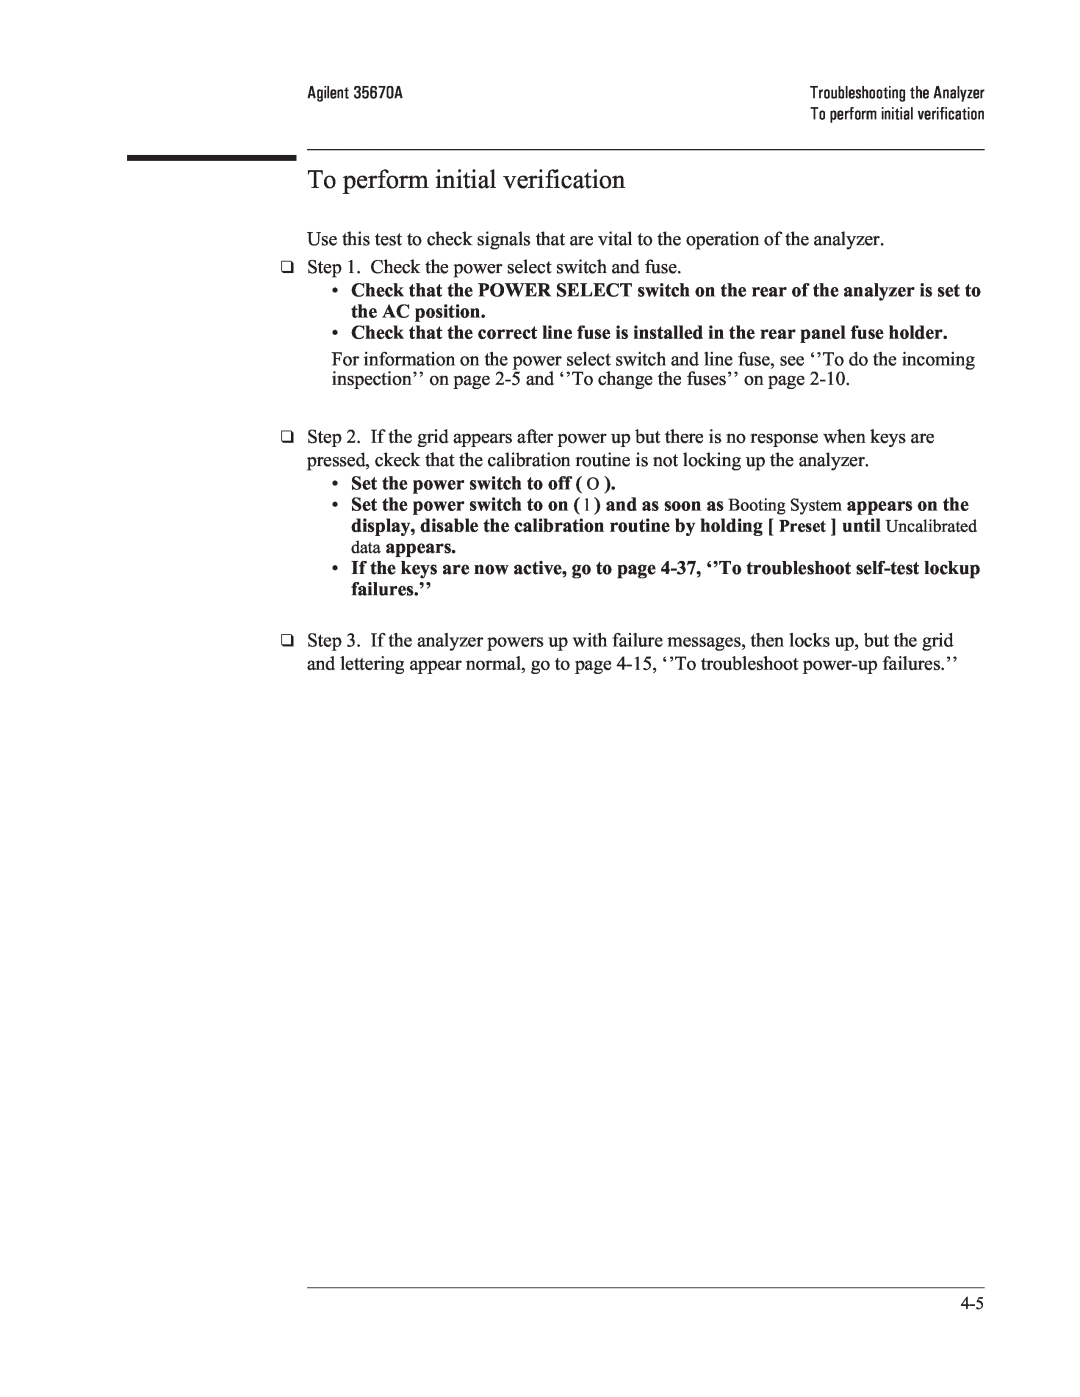 Agilent Technologies 35670-90066 manual To perform initial verification 